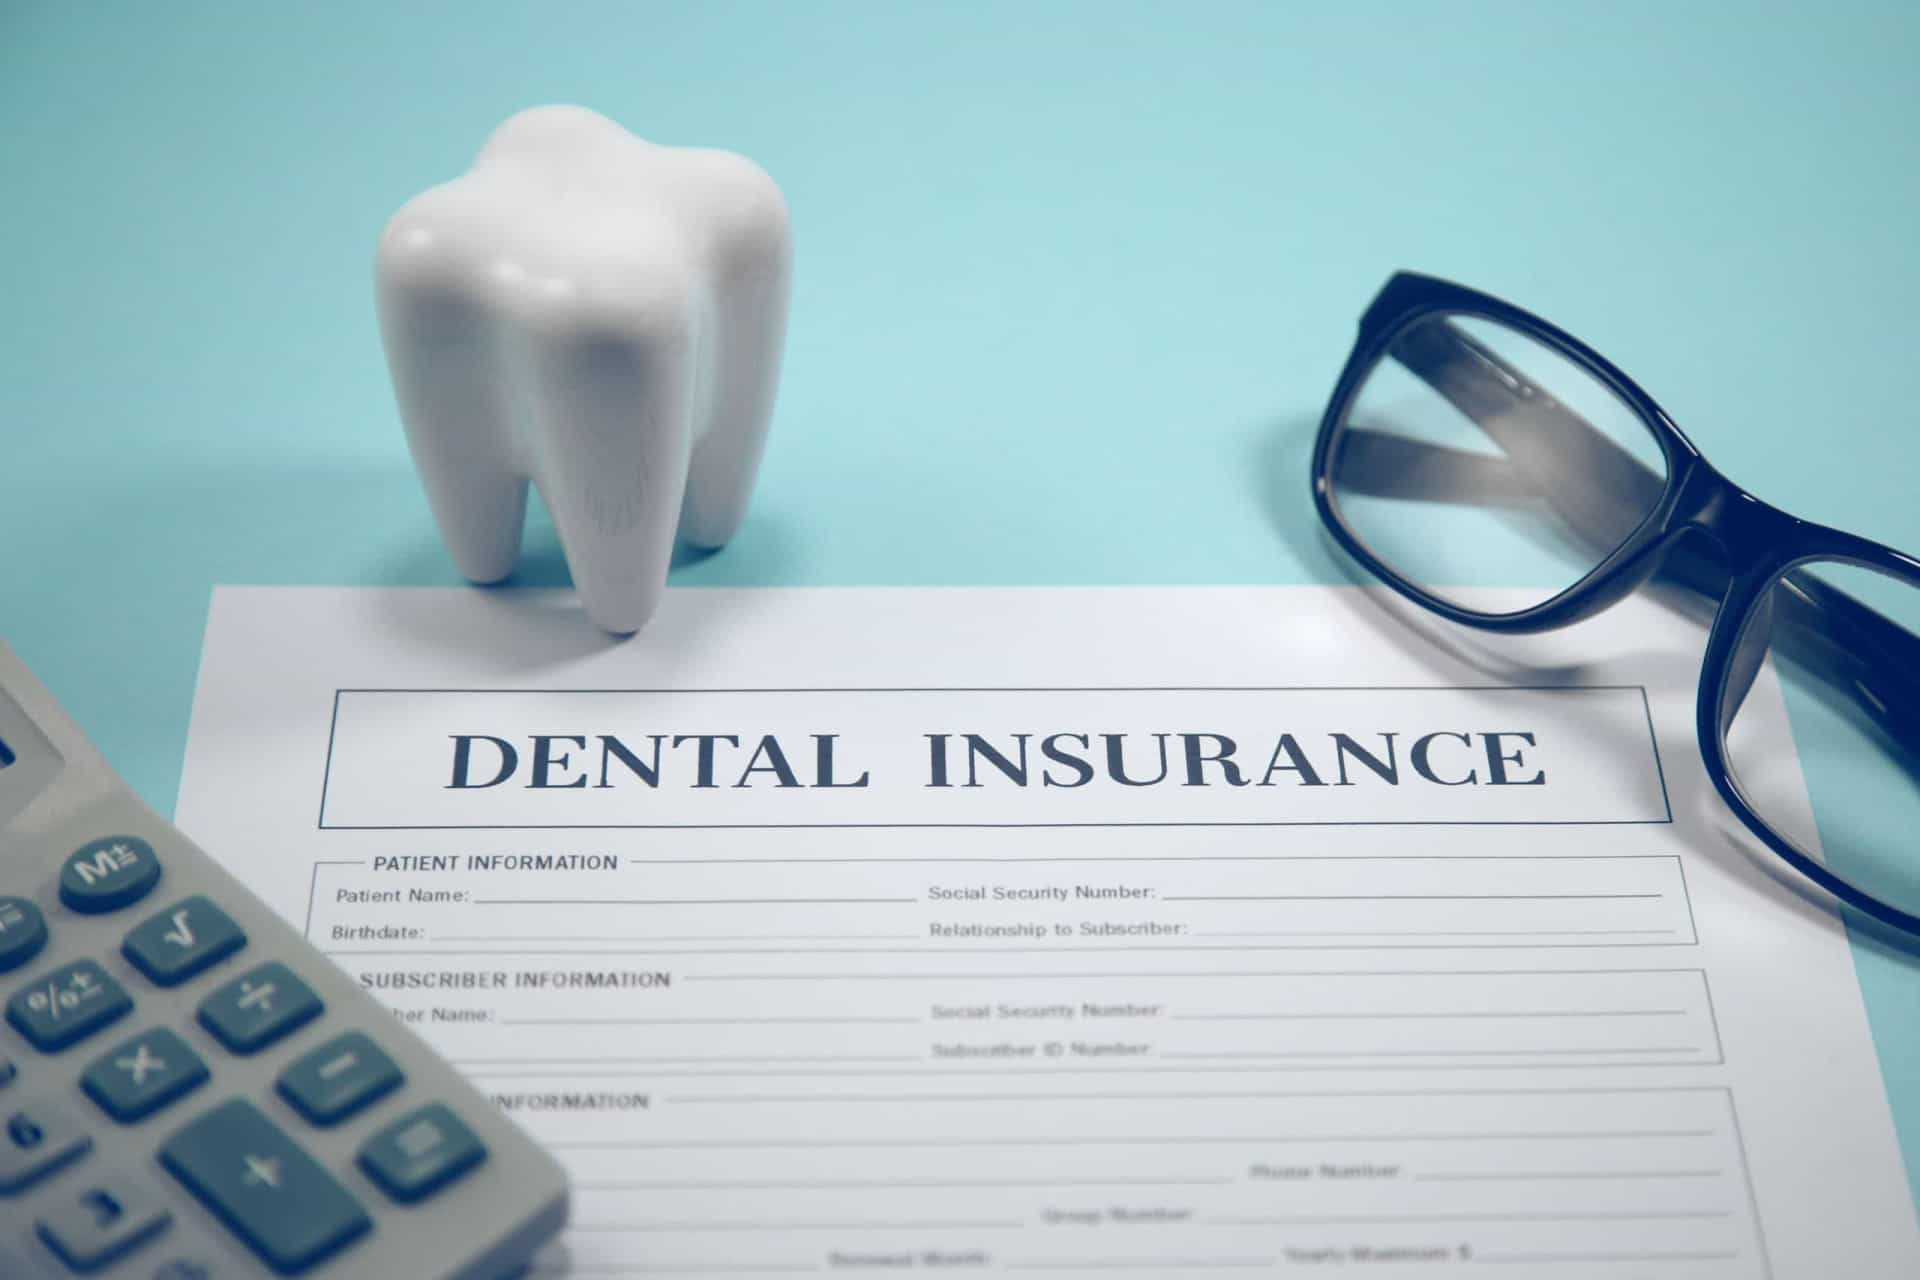 <p>Going to the dentist can be expensive, and many people do have health insurance that covers oral health. However, sometimes we fail to check which treatments are actually covered and have an unpleasant surprise when it’s time to pay the bill.</p><p>You may also like:<a href="https://www.starsinsider.com/n/464321?utm_source=msn.com&utm_medium=display&utm_campaign=referral_description&utm_content=516746en-en"> The most bizarre and dangerous fashion trends in history</a></p>